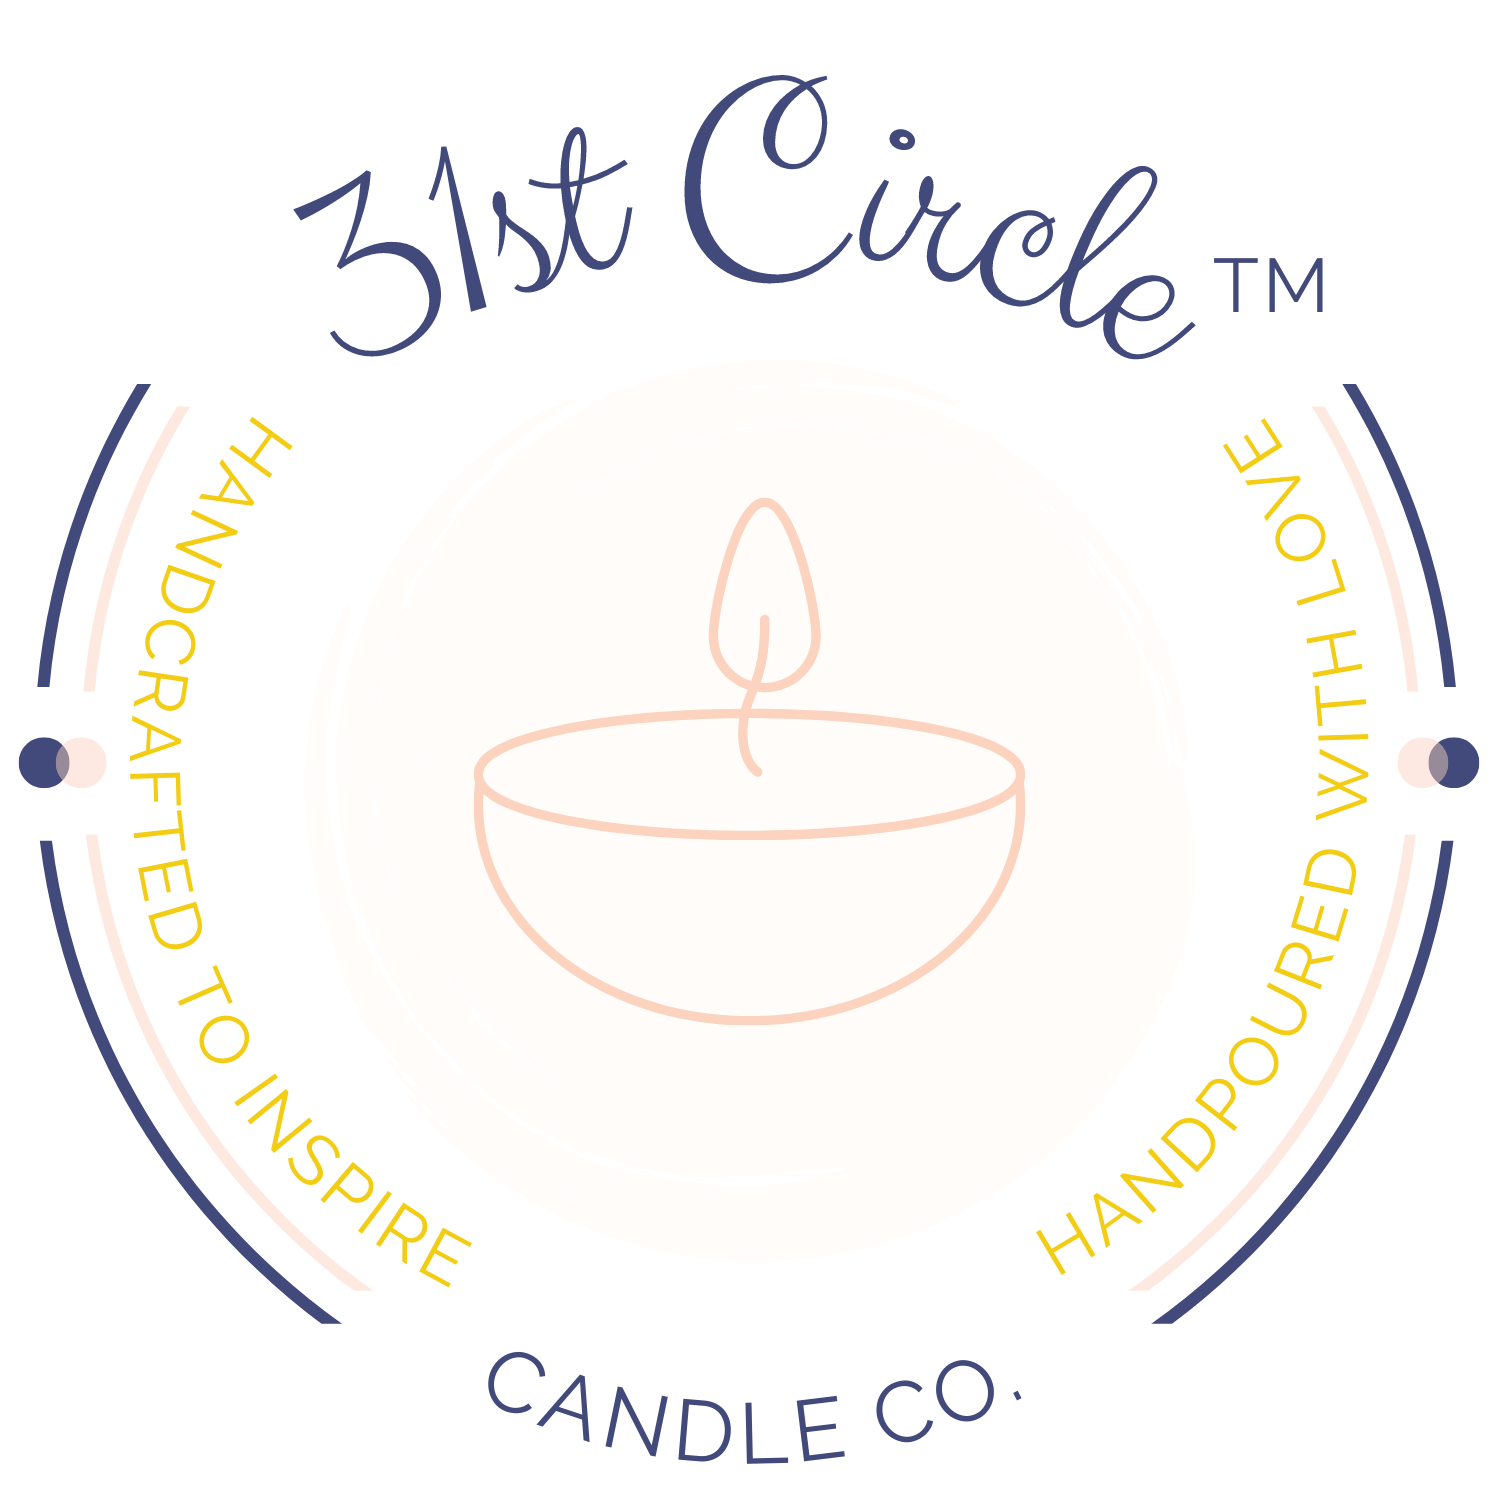 31st Circle Candle Co